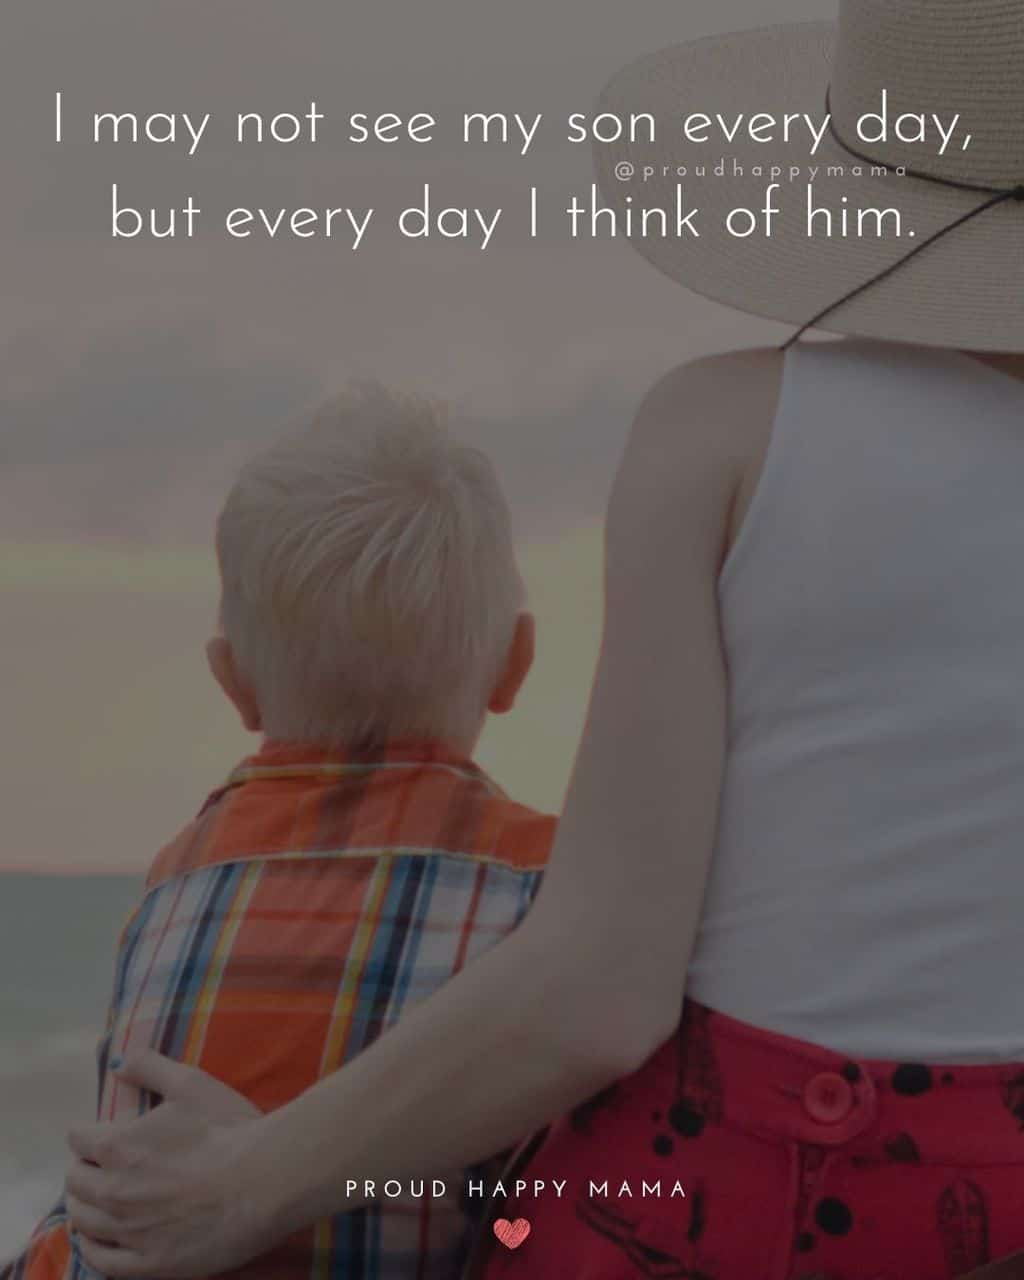 Son Quotes - I may not see my son every day, but every day I think of him.’